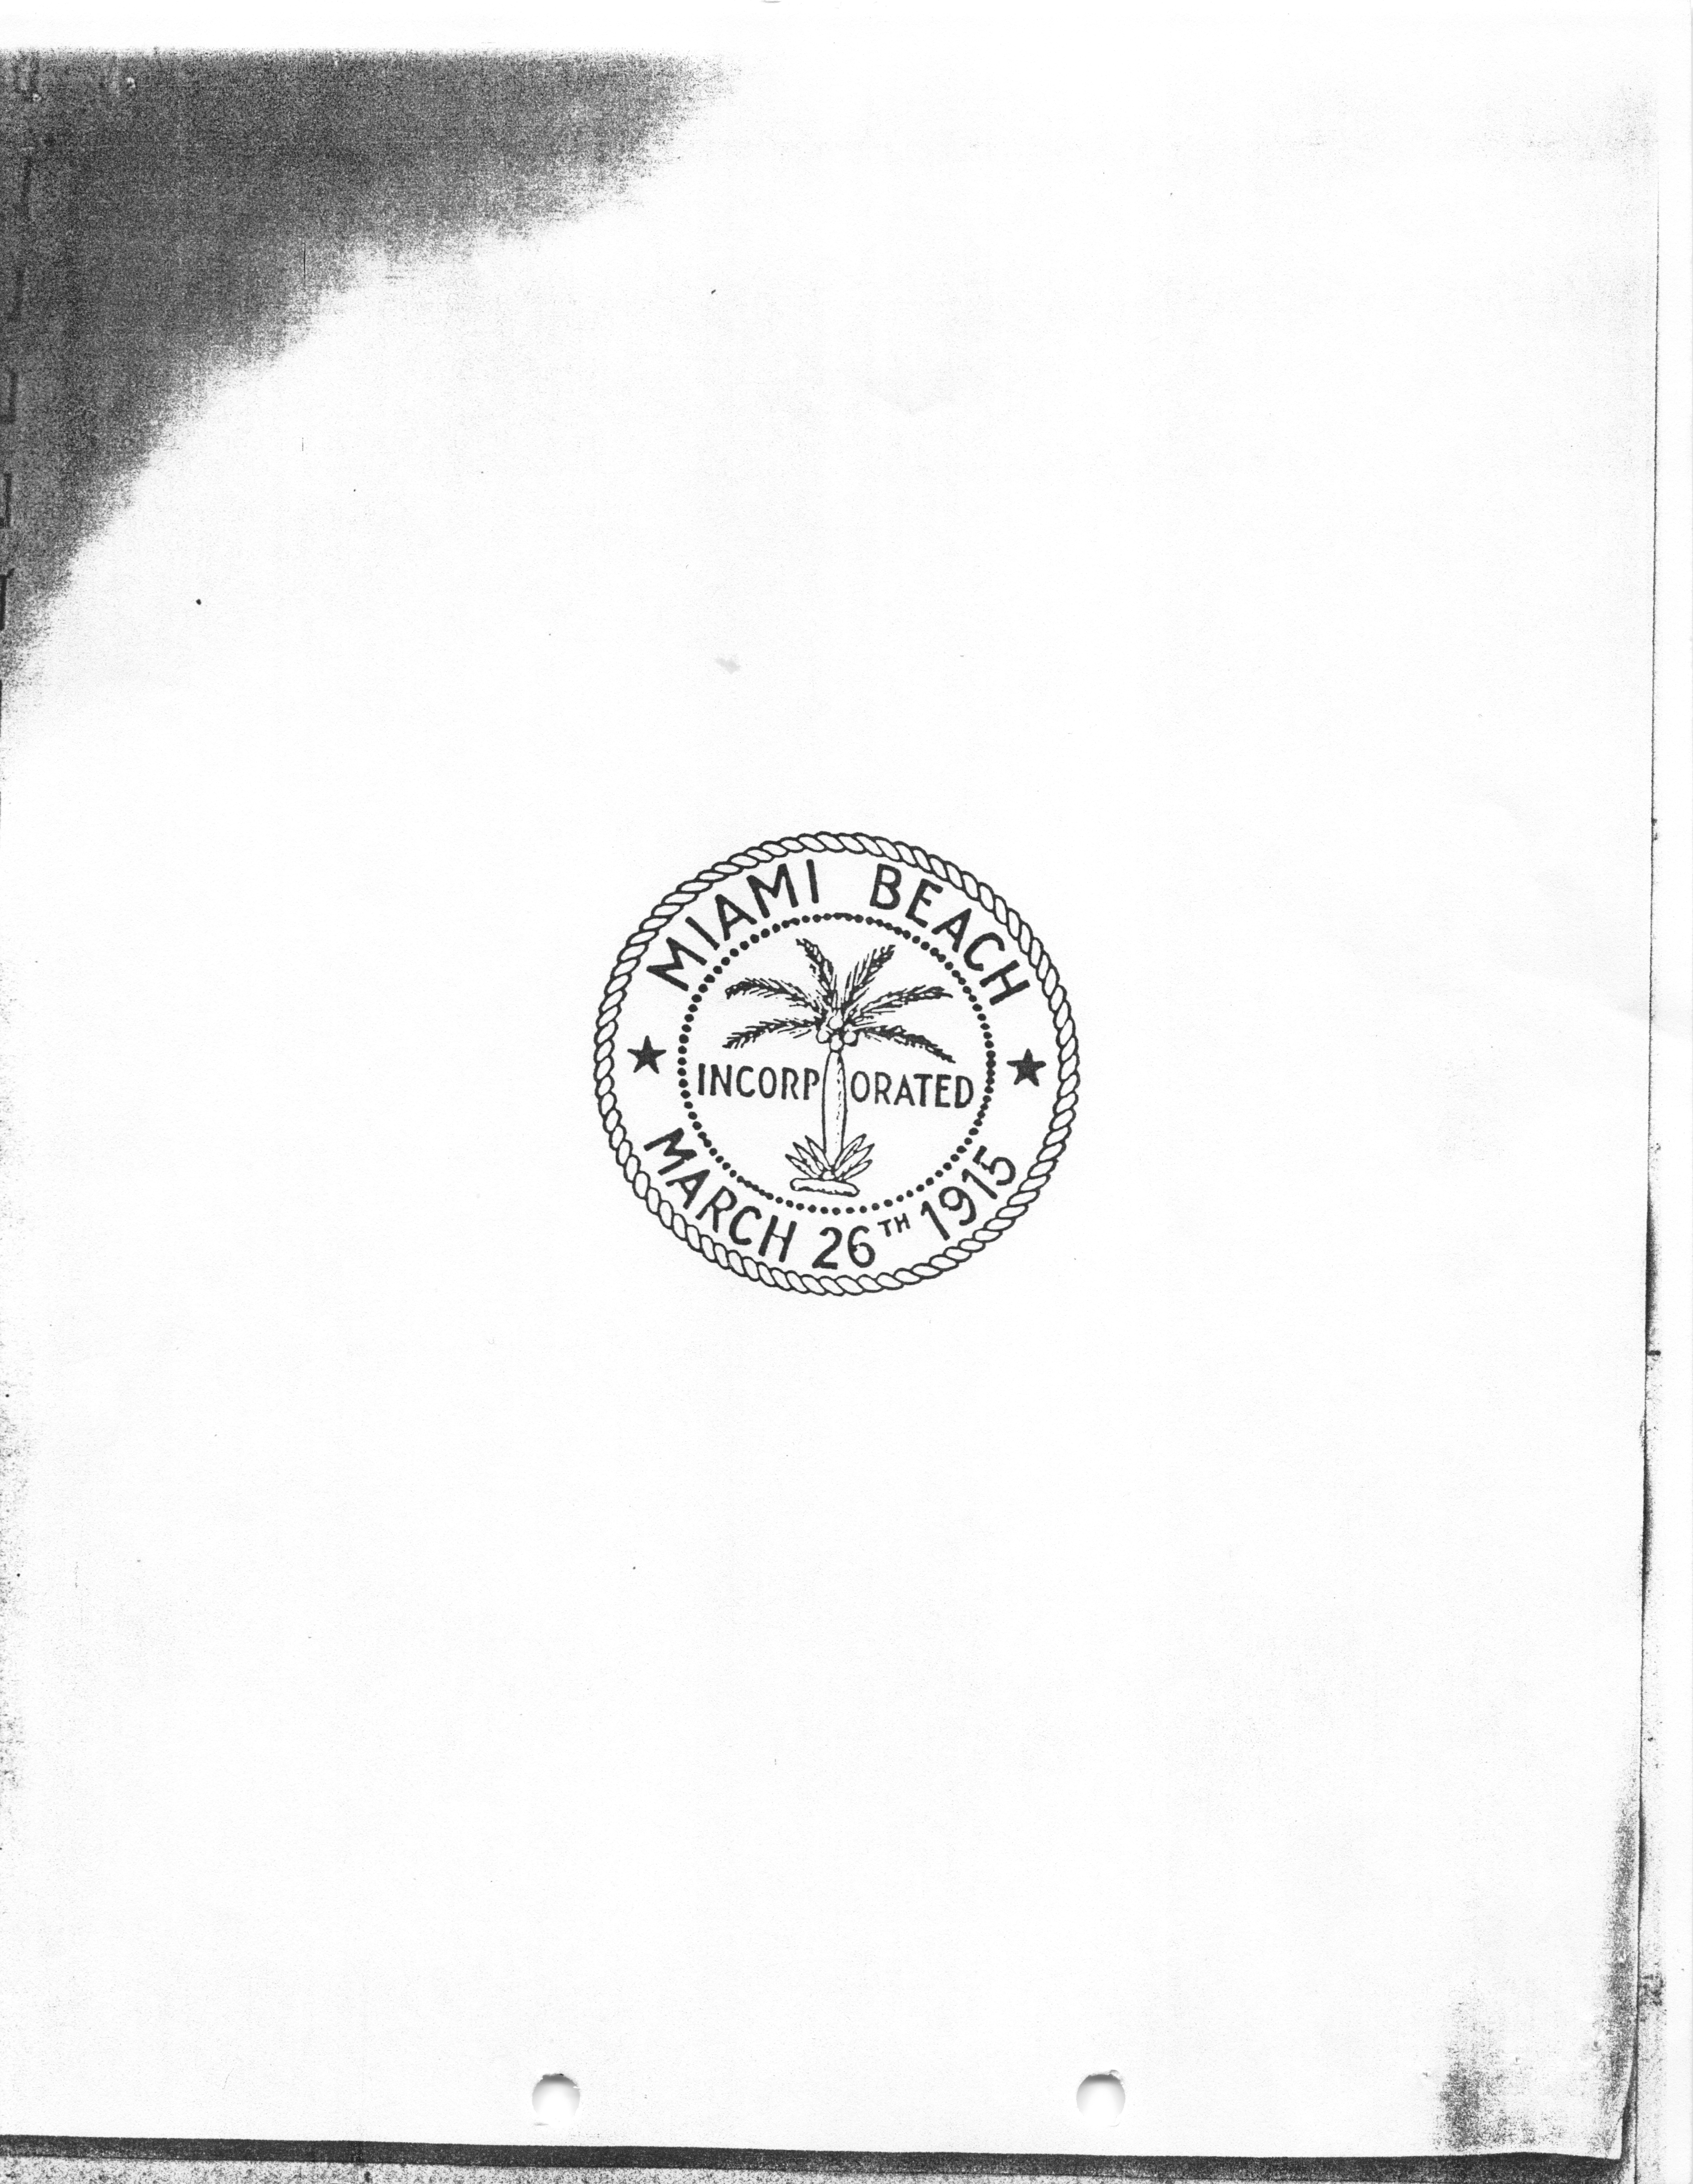 1980s statistical reports about Miami Beach demographics, employment, income, spending, etc - Cover: [Seal of the city of Miami Beach]